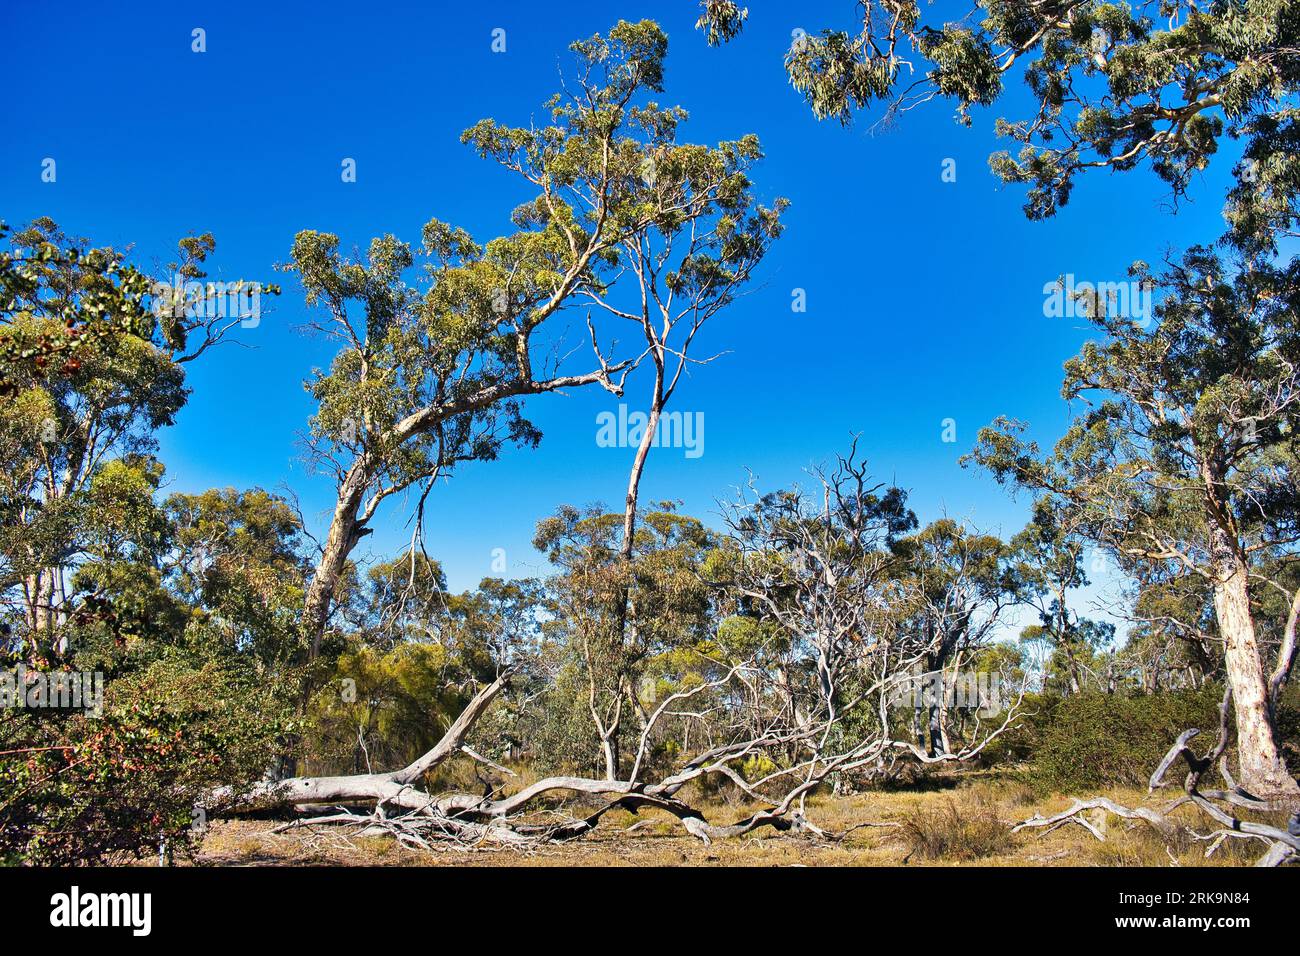 Vegetation with fallen tree in the dry and arid outback north of the Stirling Range, Western Australia Stock Photo